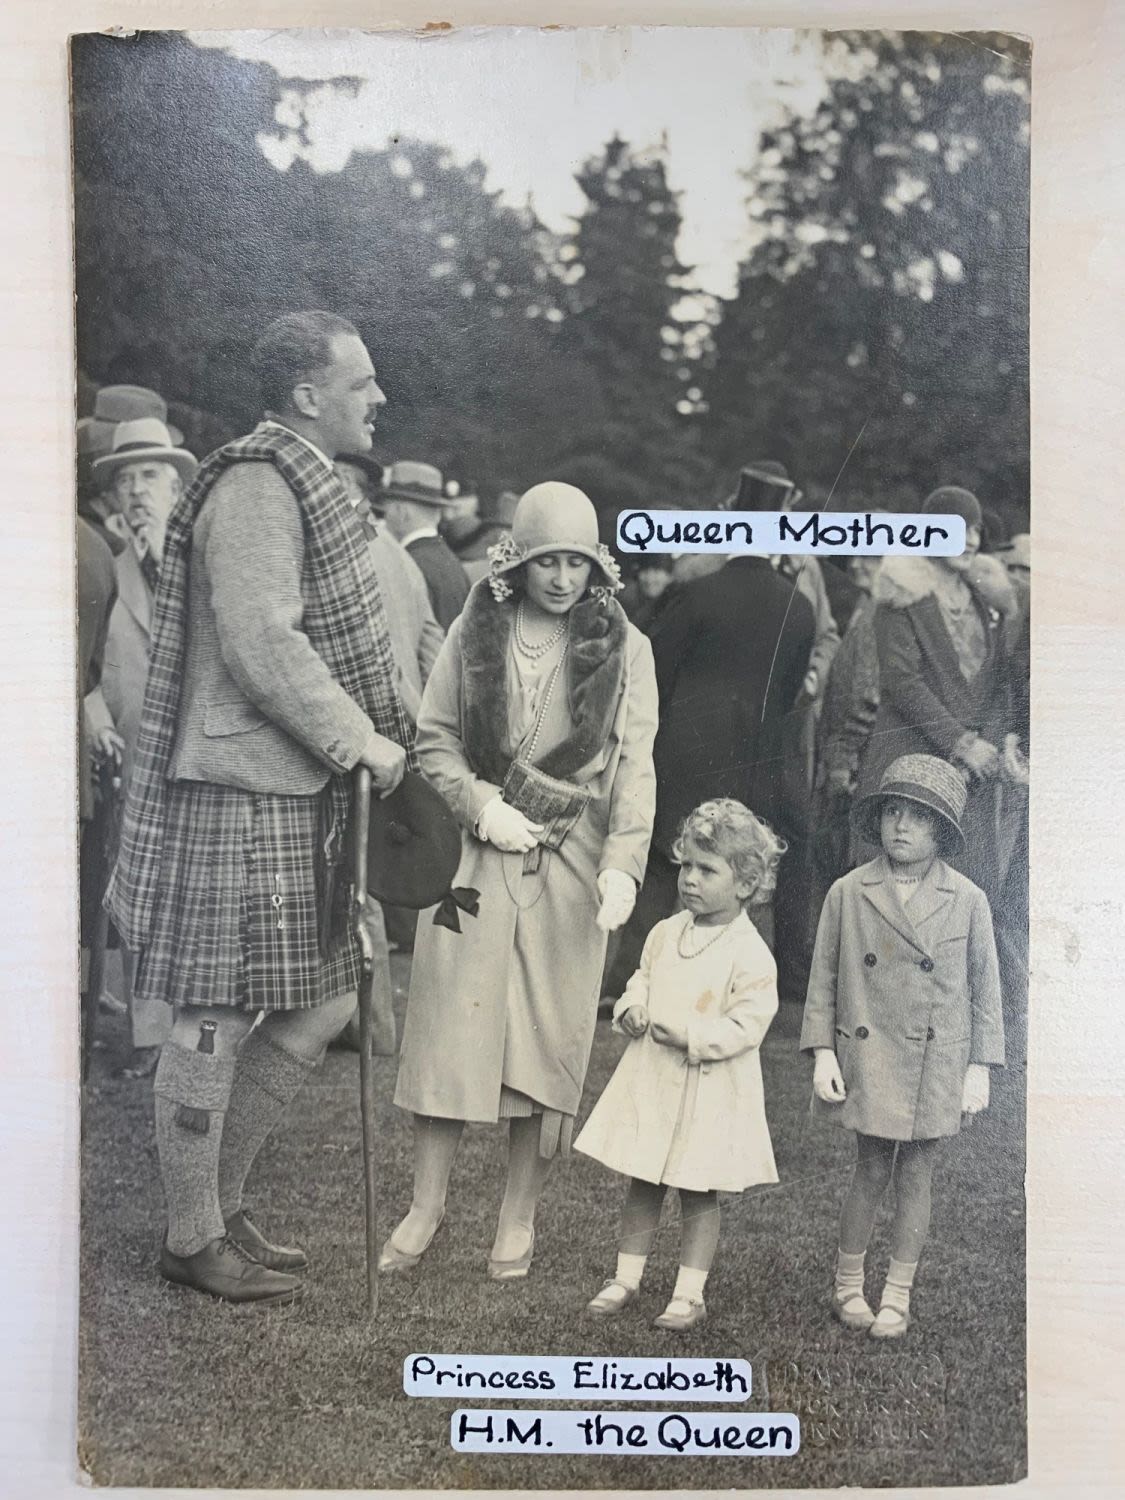 Photograph of The Princess Elizabeth with Queen Mother by Laings Studios in 1929 13x21 cm